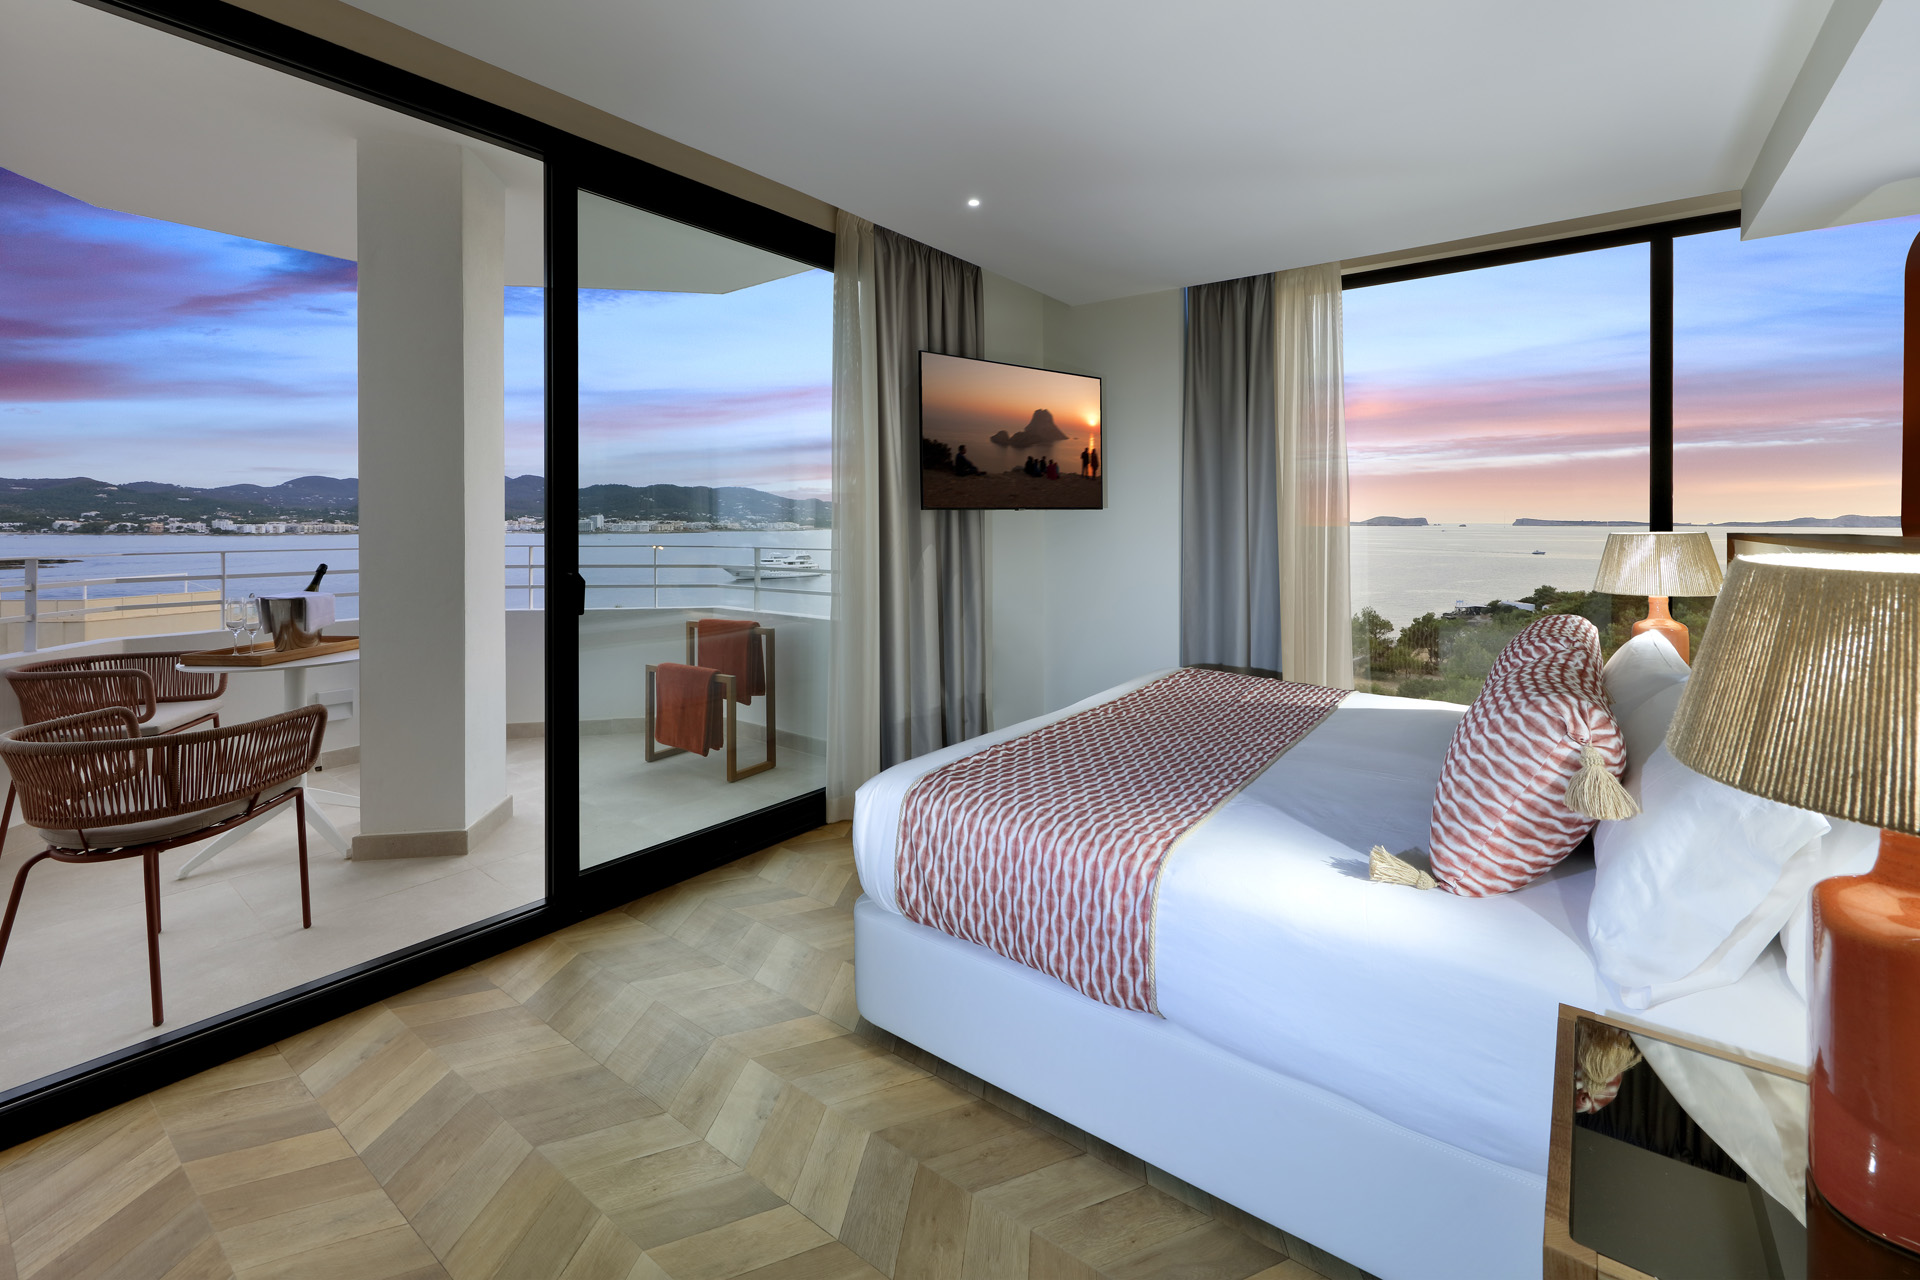 A sea-view bedroom at the hotel